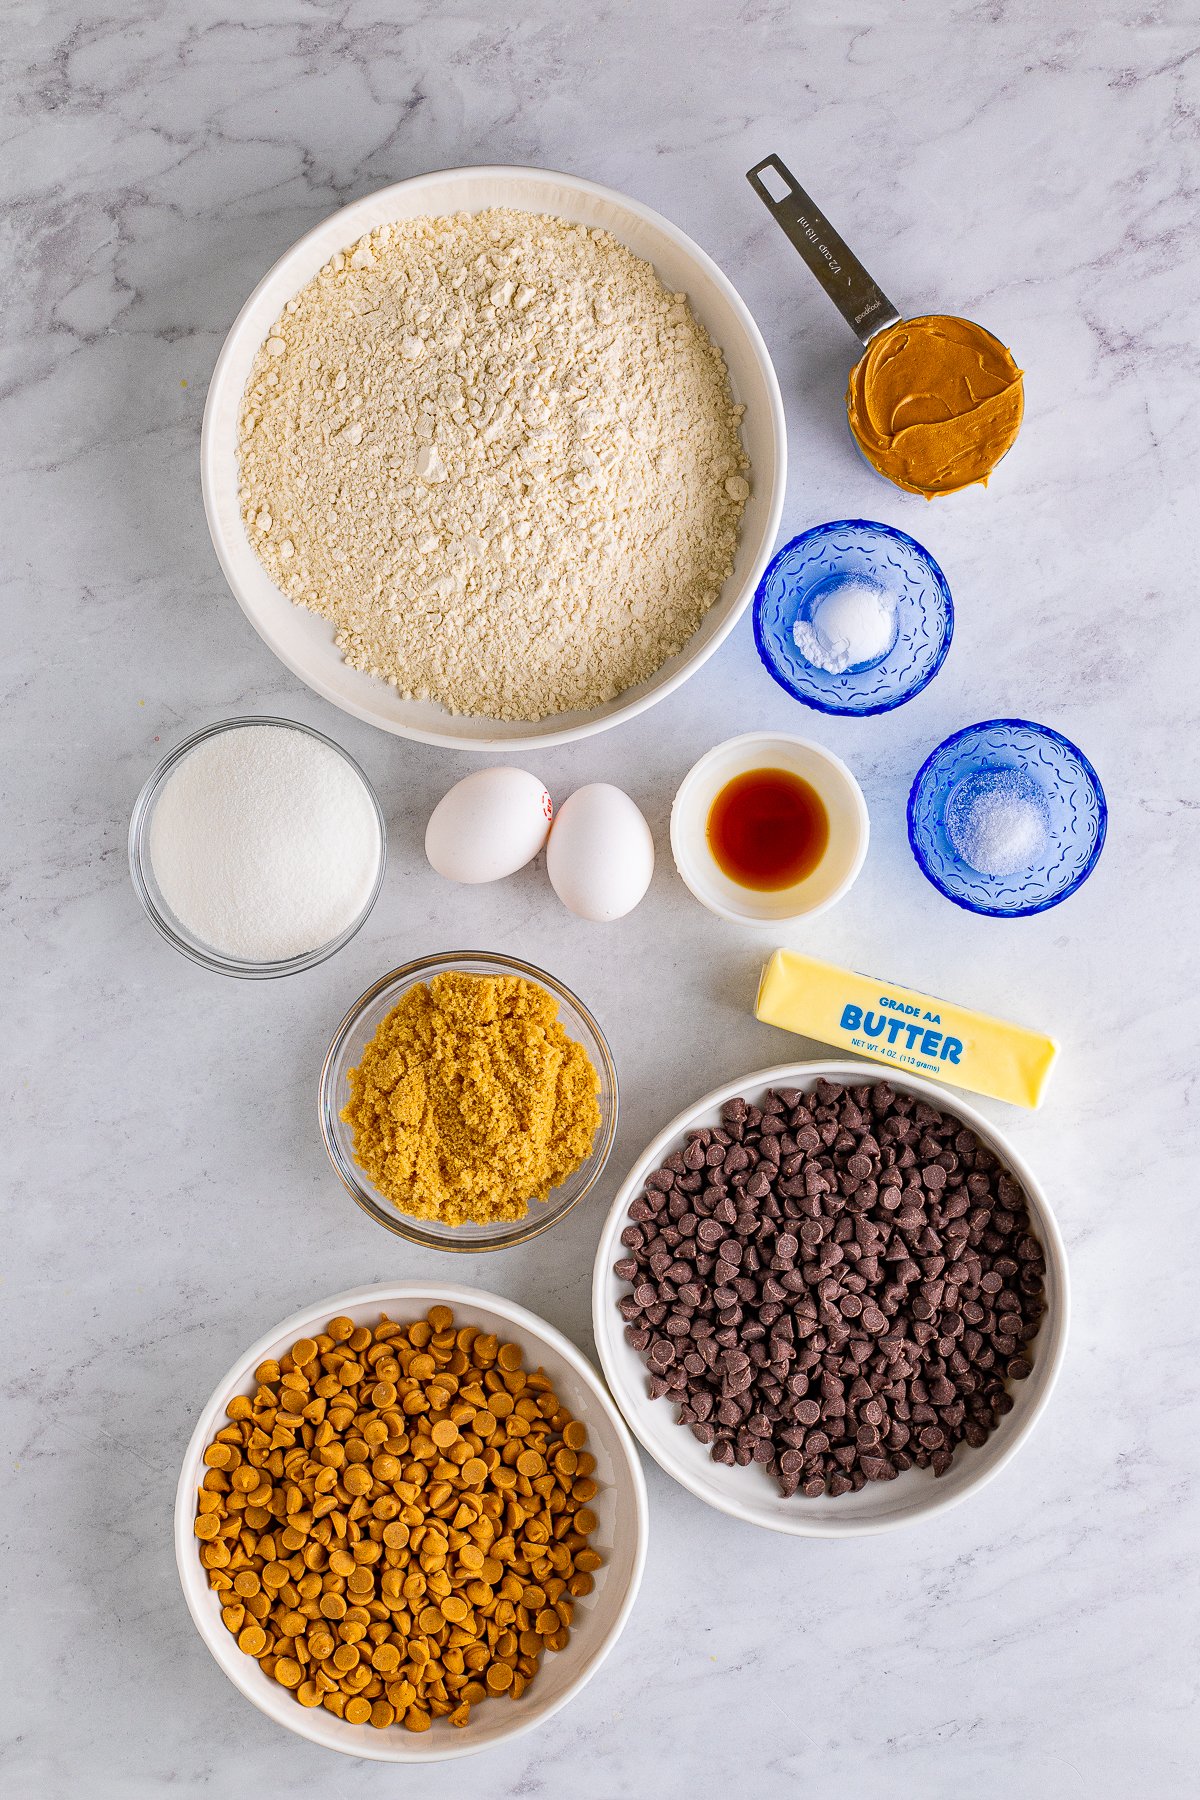 Ingredients needed to make Peanut Butter Chocolate Chip Cookie Bars.